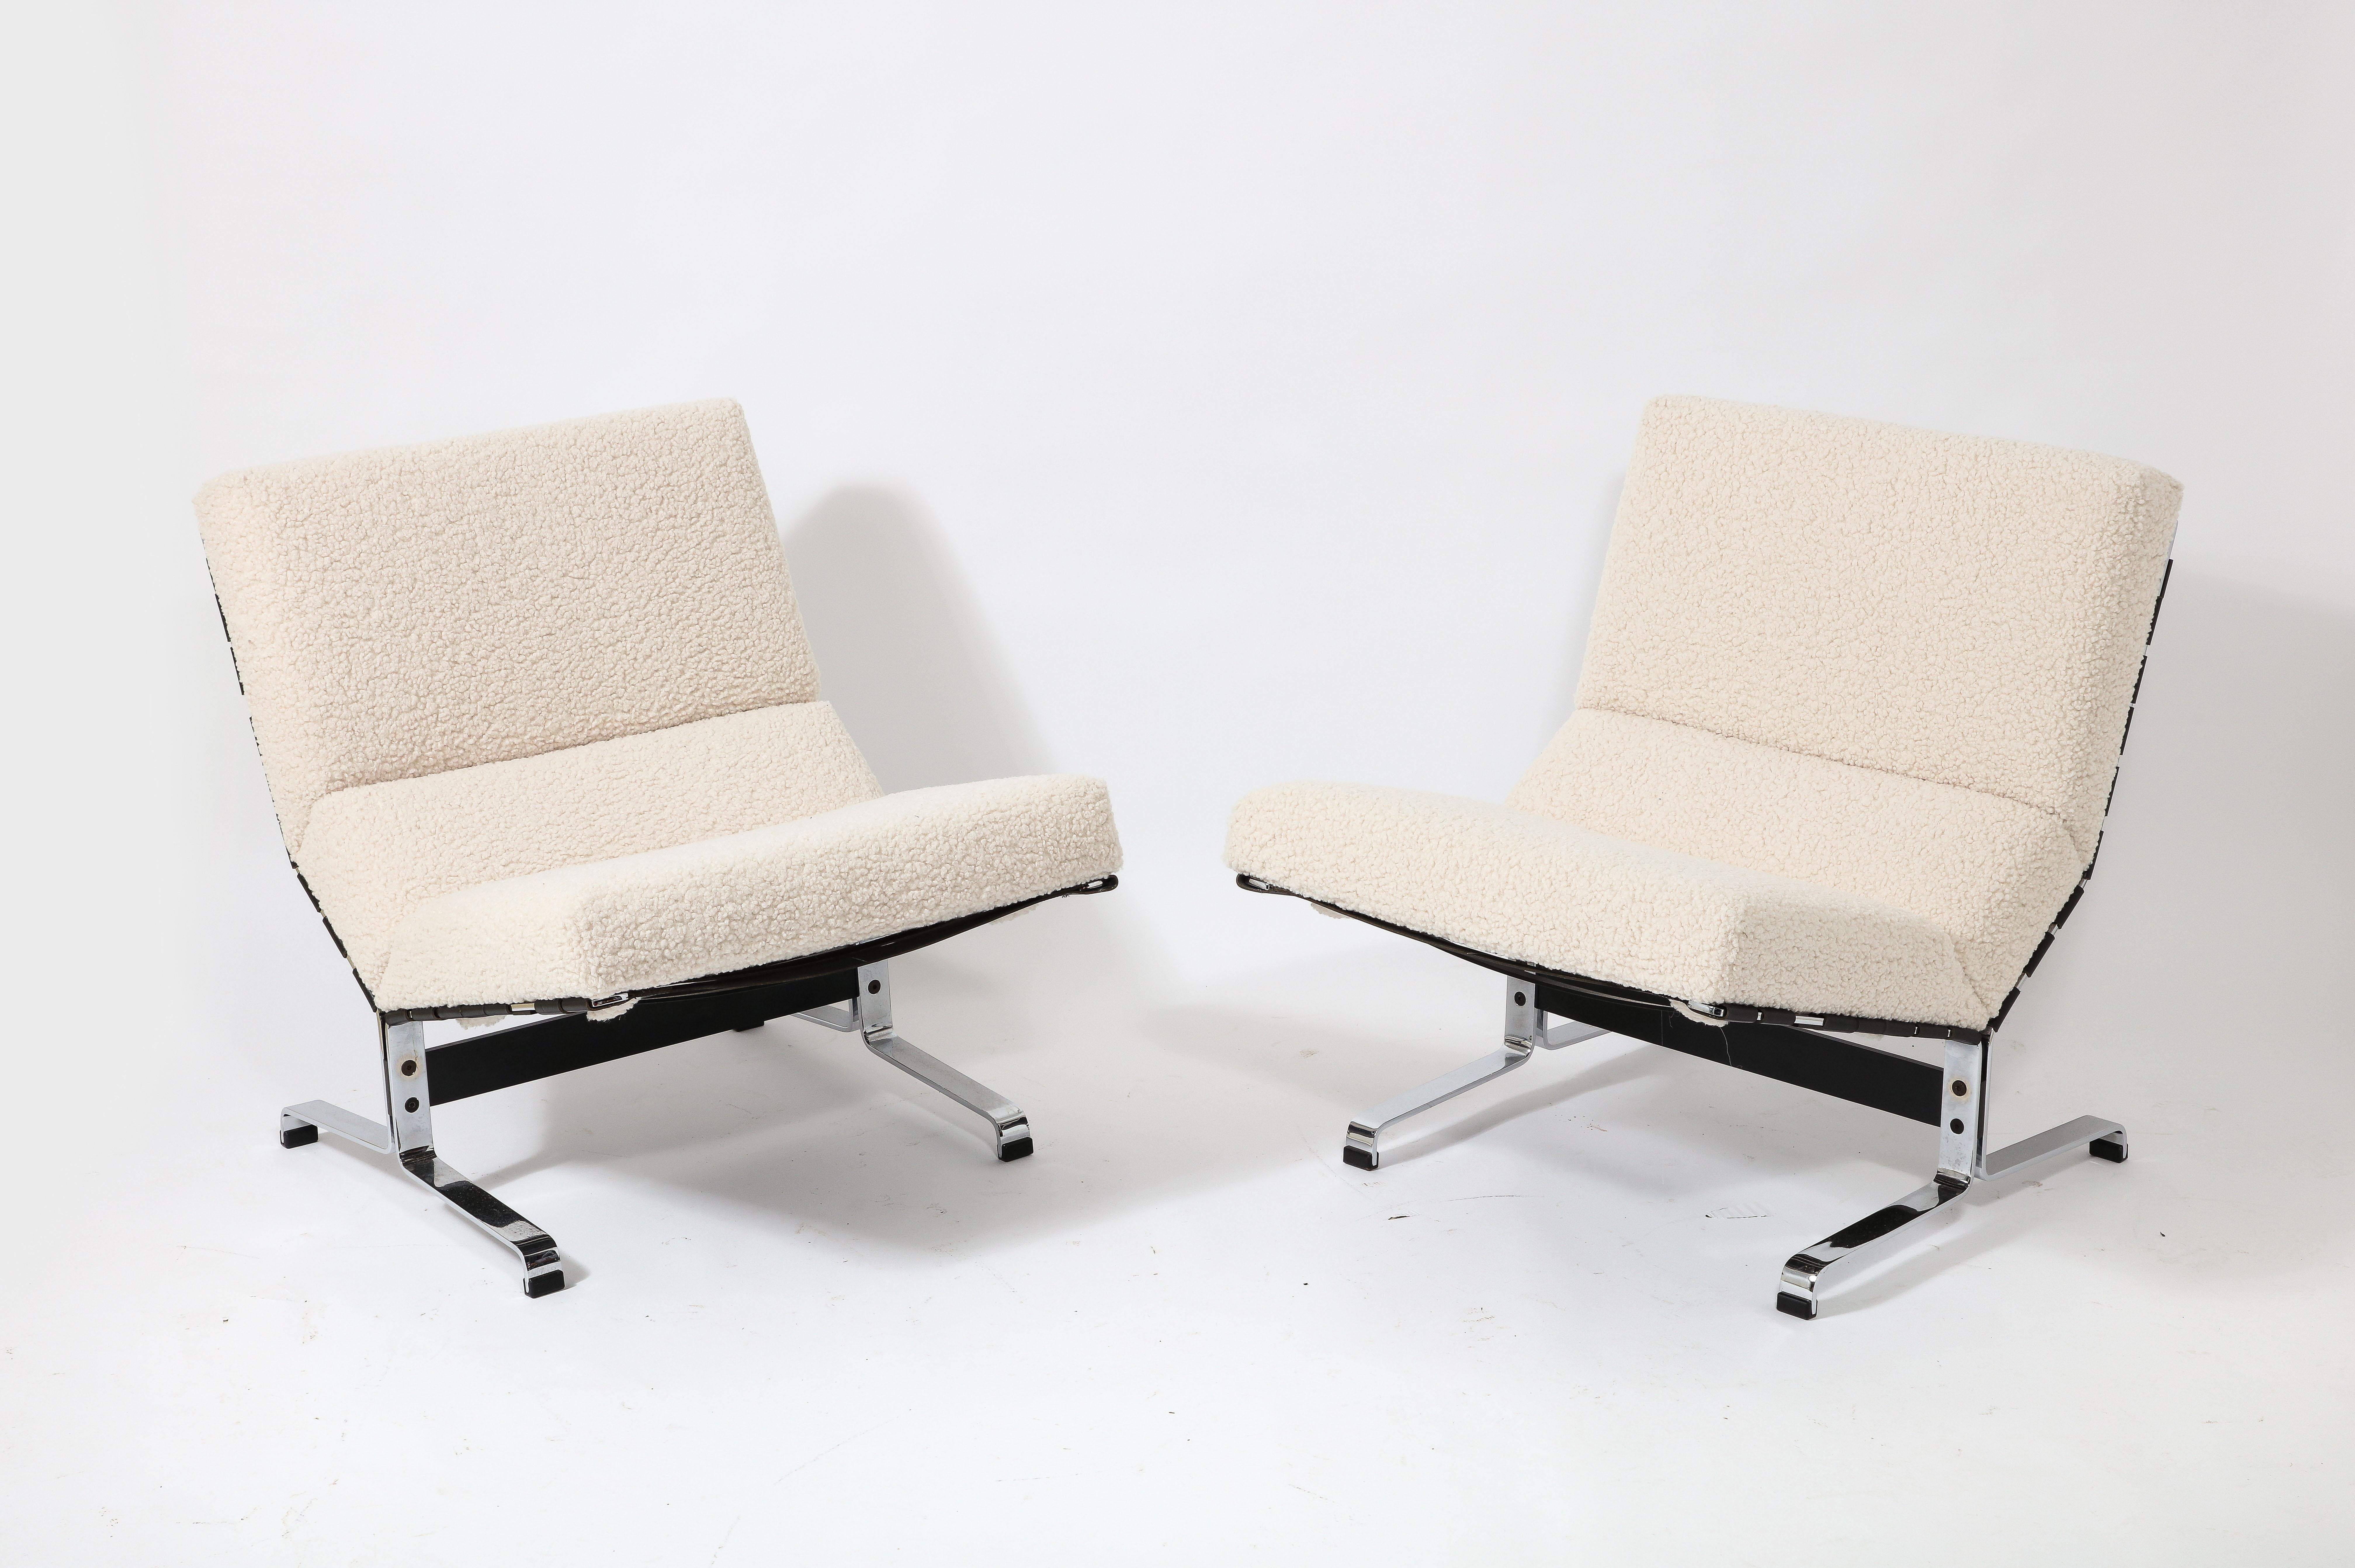 Etienne Fermigier Pair of Slipper Lounge Chairs in Cream, France 1960's For Sale 7